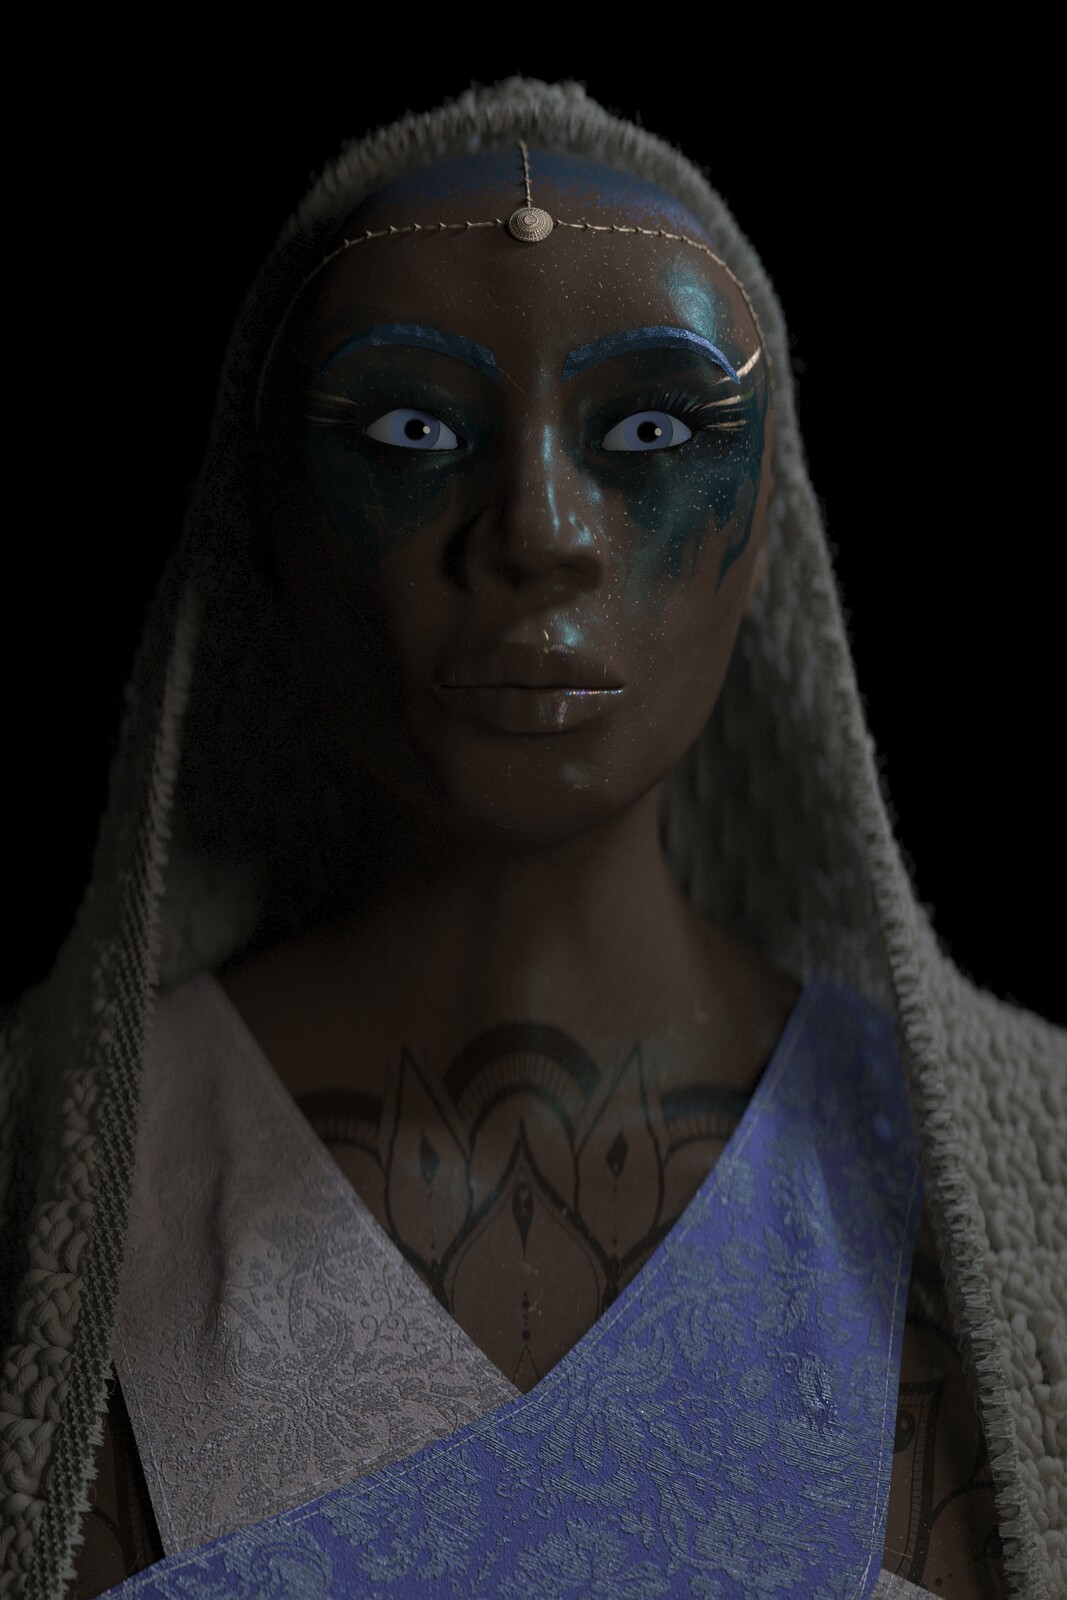 first iteration of the clothing and make-up up close